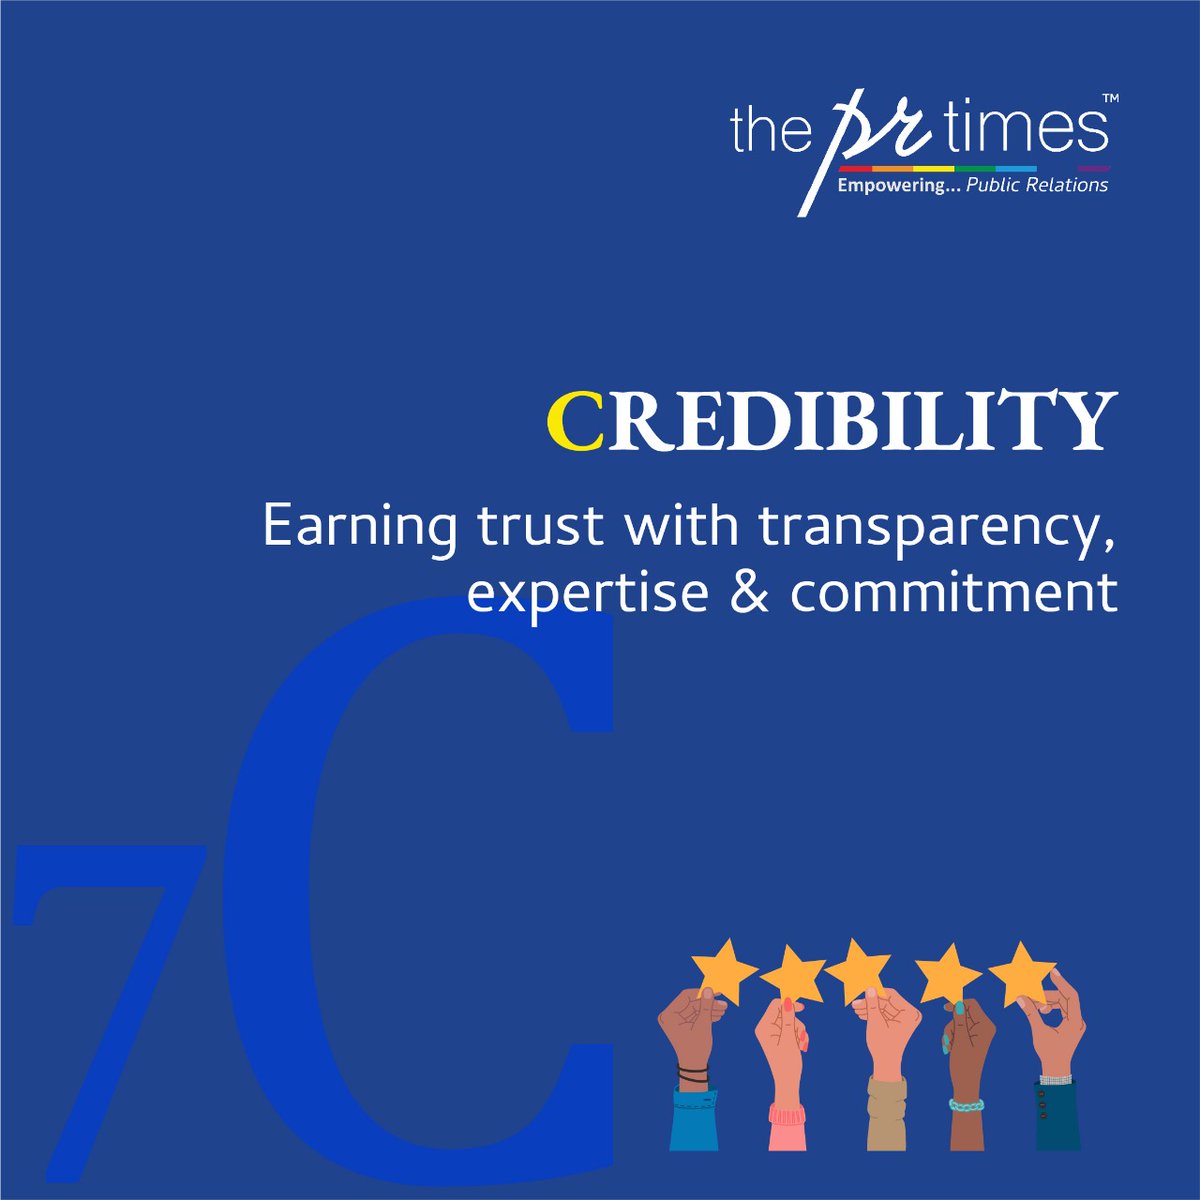 Credibility: 'Earn trust, build credibility. With transparency and integrity, your brand becomes a beacon of reliability in a crowded marketplace. #TrustBuilding #BrandCredibility #PR'